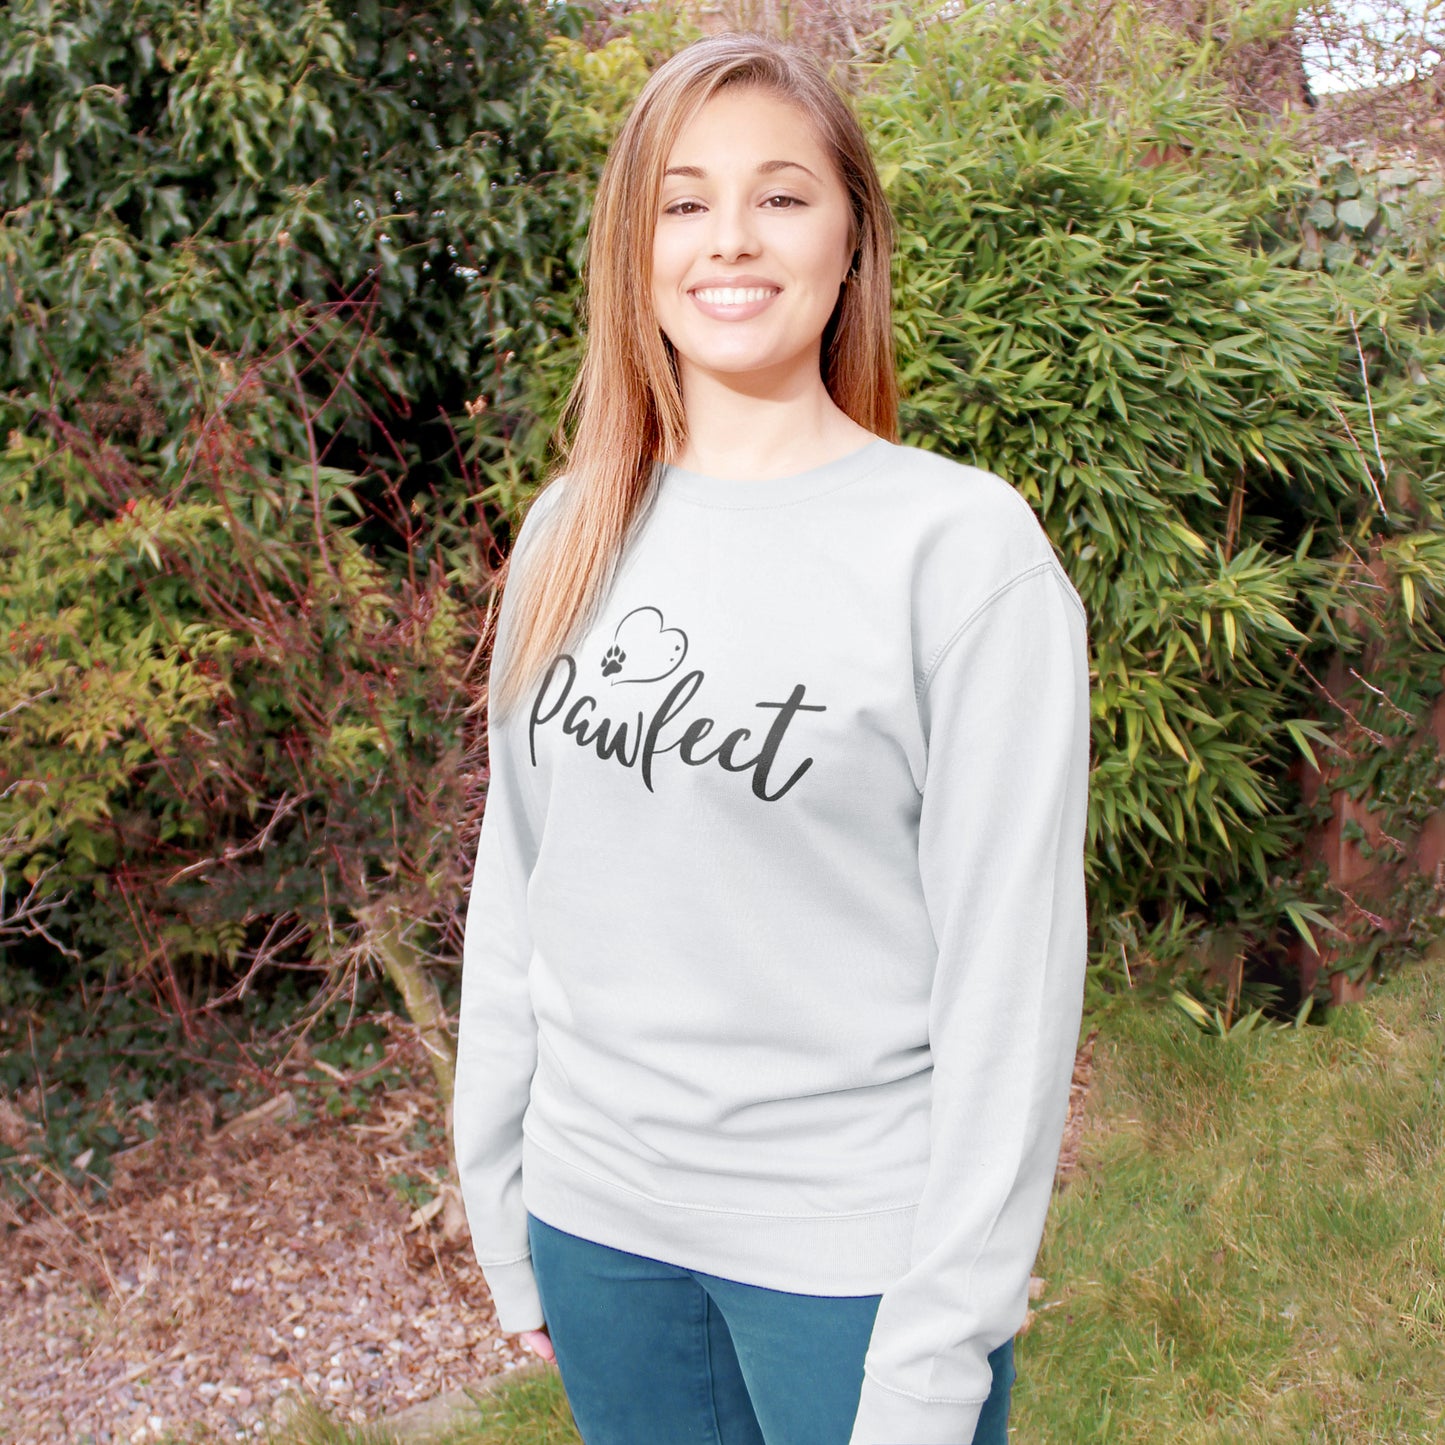 Light grey relaxed fit long sleeve sweatshirt worn by caucasian woman with long brown hair. Slogan sweater design wording Pawfect in dark grey font and charcoal grey heart outline above with dog paw print within outline. Woman wears rust colour jeans and is stood in outdoors in a garden with plants behind